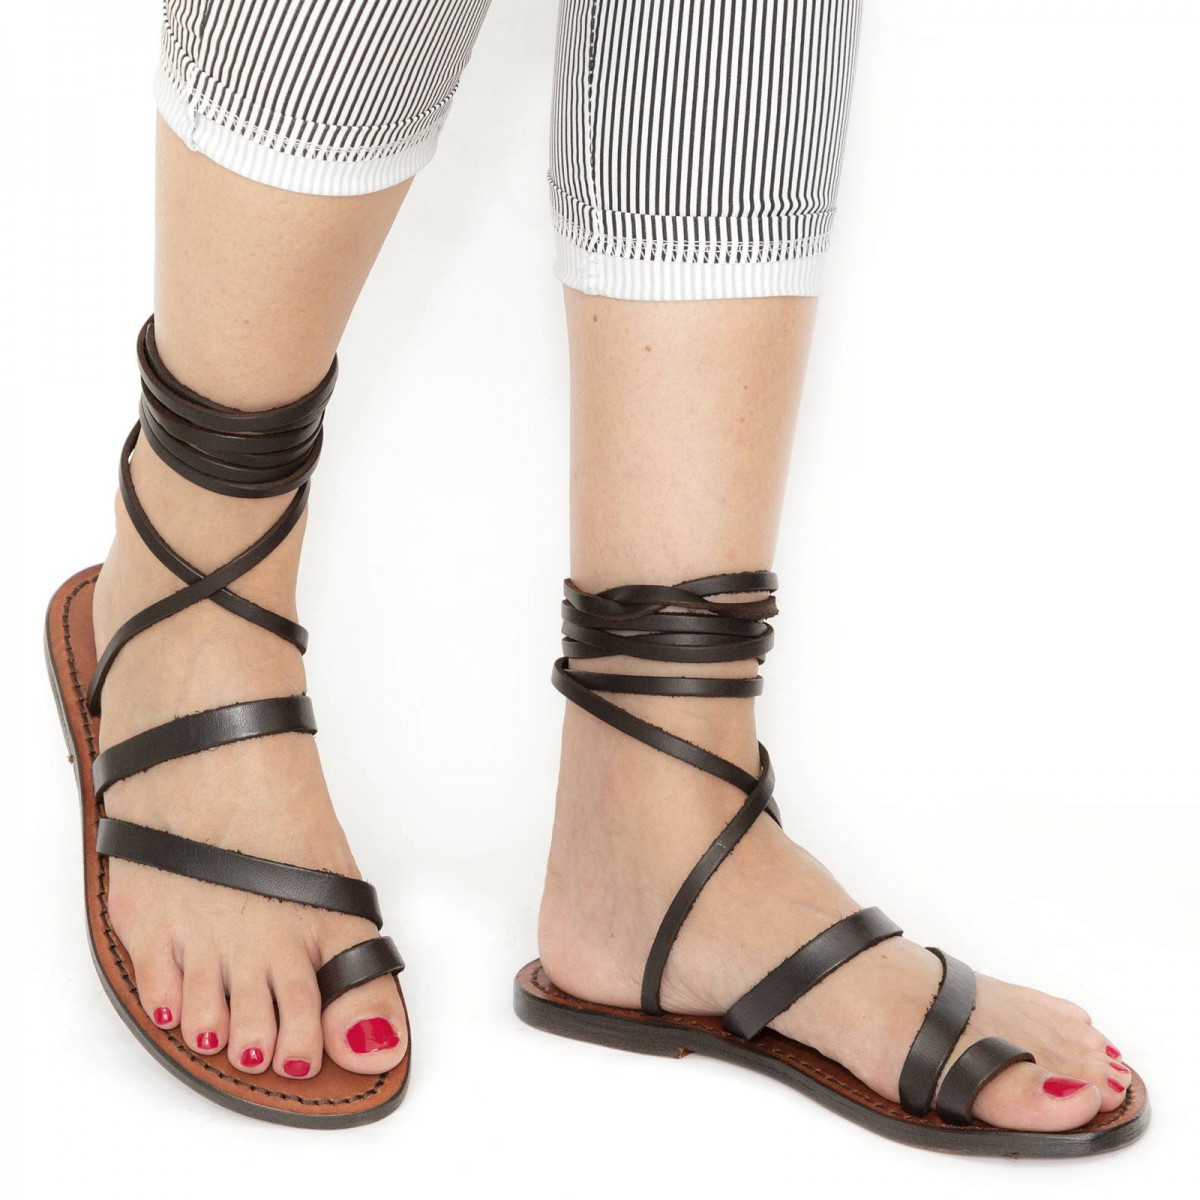 Handmade flat strappy sandals in brown calf leather | The leather craftsmen